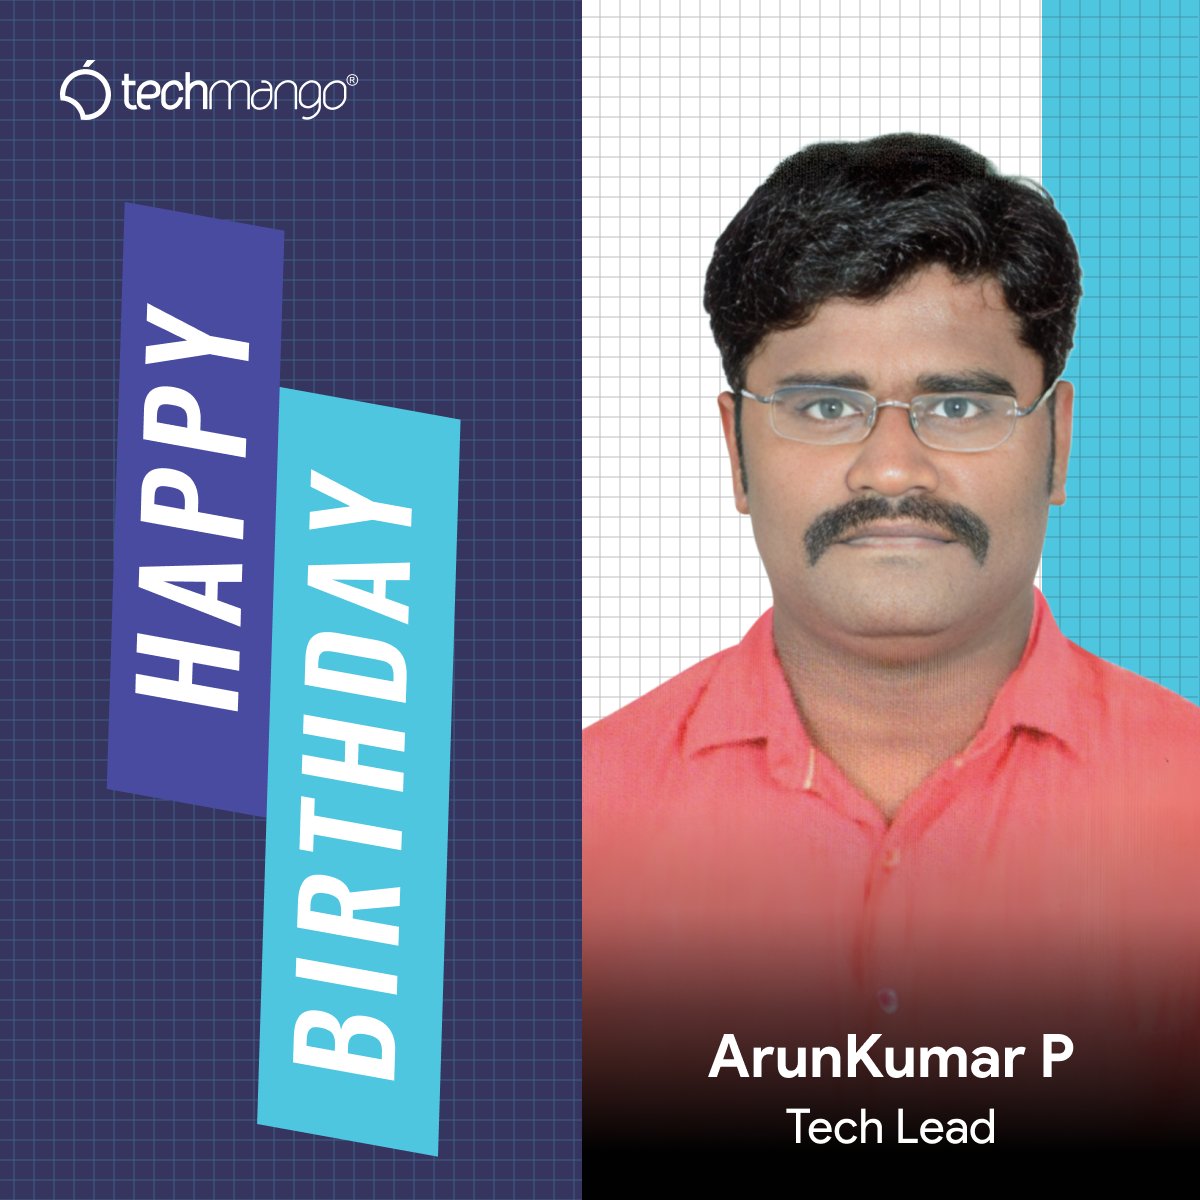 Techmango Wishes Happy Birthday to Arunkumar Pandian Cheers to another fantastic year ahead! May this birthday be the start of your greatest, most wonderful journey yet. Have a fantastic day! #happybirthday #birthdaywishes #birthdaycelebration #birthdayparty #birthdaycheers